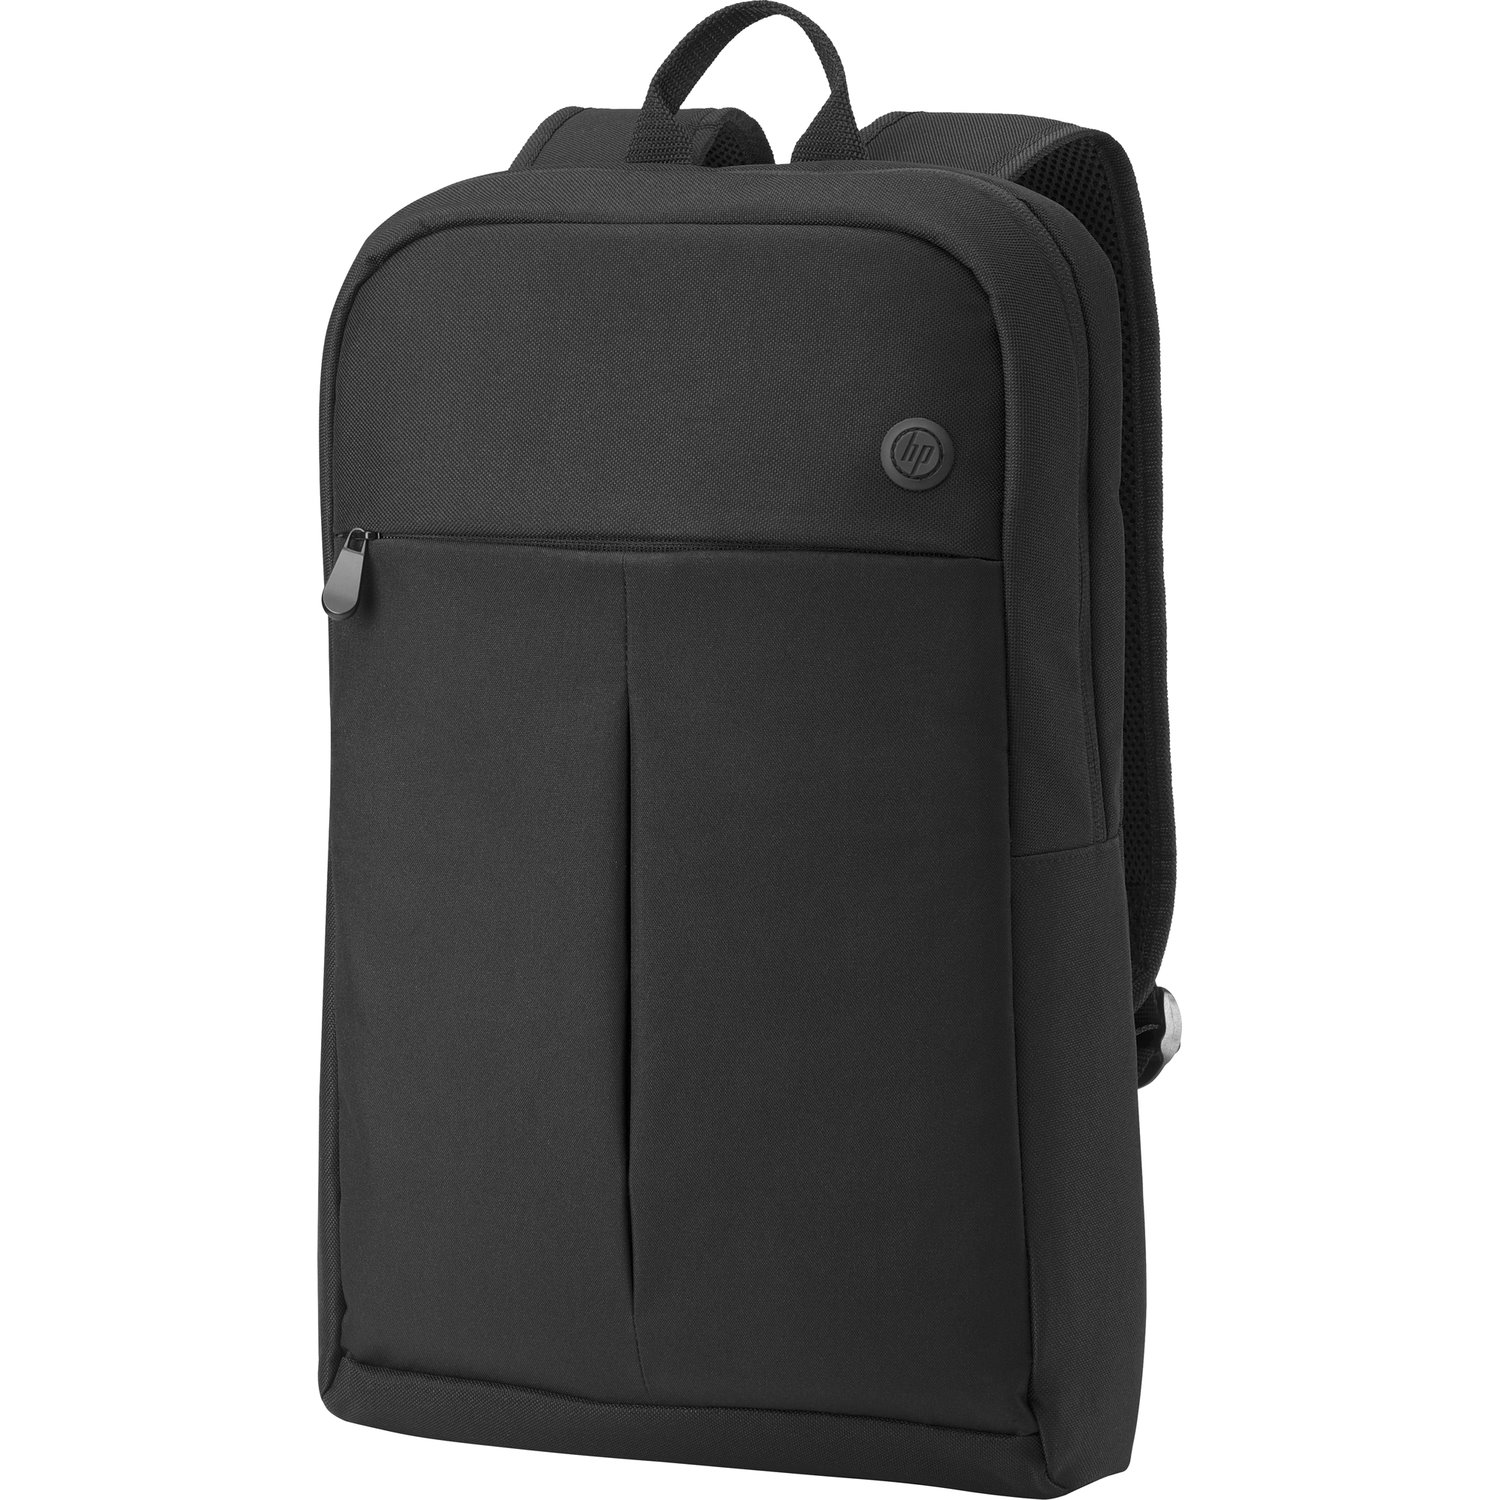 HP Prelude Carrying Case (Backpack) for 33 cm (13") to 39.6 cm (15.6") Notebook